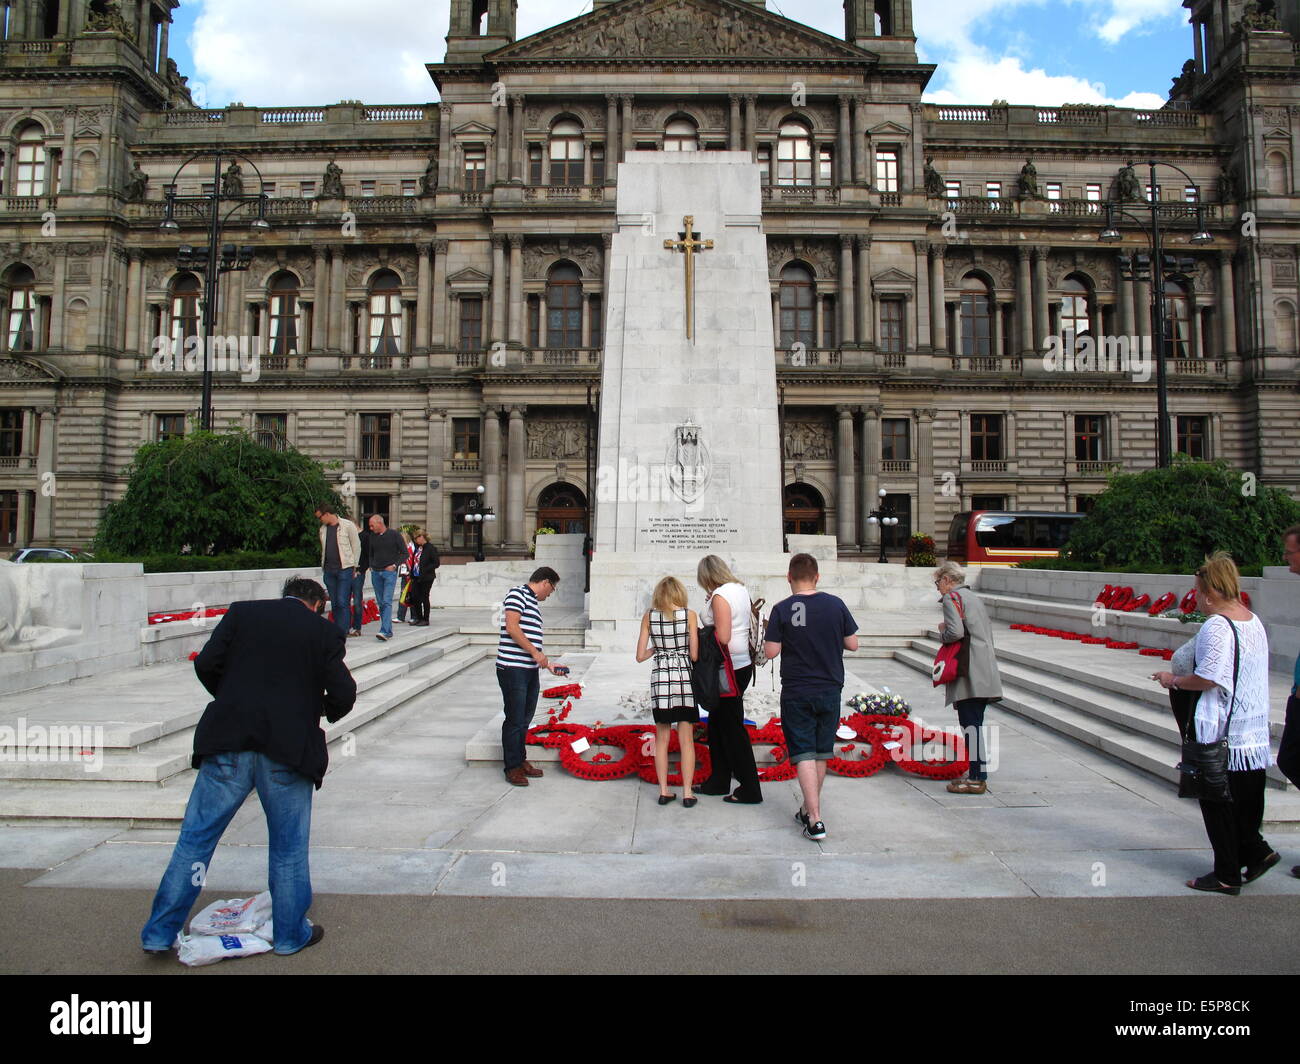 George Square, Glasgow, Scotland, UK. 4th Aug, 2014. Commonwealth leaders place wreaths at the cenotaph as part of events to commemorate the start of WW1 100 years ago. Credit:  ALAN OLIVER/Alamy Live News Stock Photo